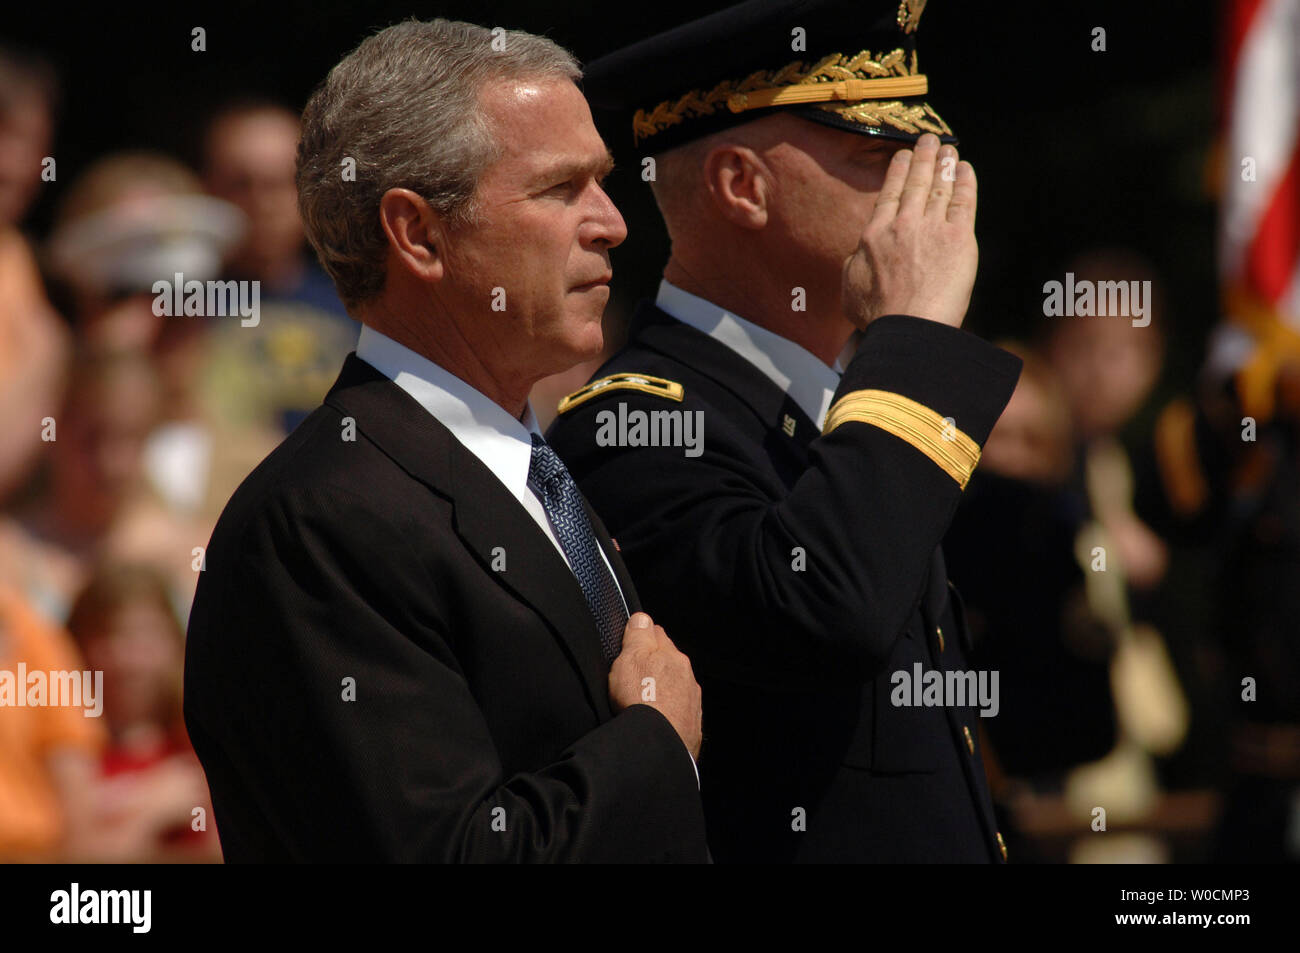 President George W. Bush covers his heart while participating in a Memorial Day ceremony at the Tomb of the Unknowns, on May 30, 2005 in Arlington National Cemetery. Maj. Gen. Galen B. Jackman stands on the President's right.  This year, members of the armed services paid special tribute to those who have died in Iraq and Afghanistan.  (UPI Photo/Michael Kleinfeld) Stock Photo